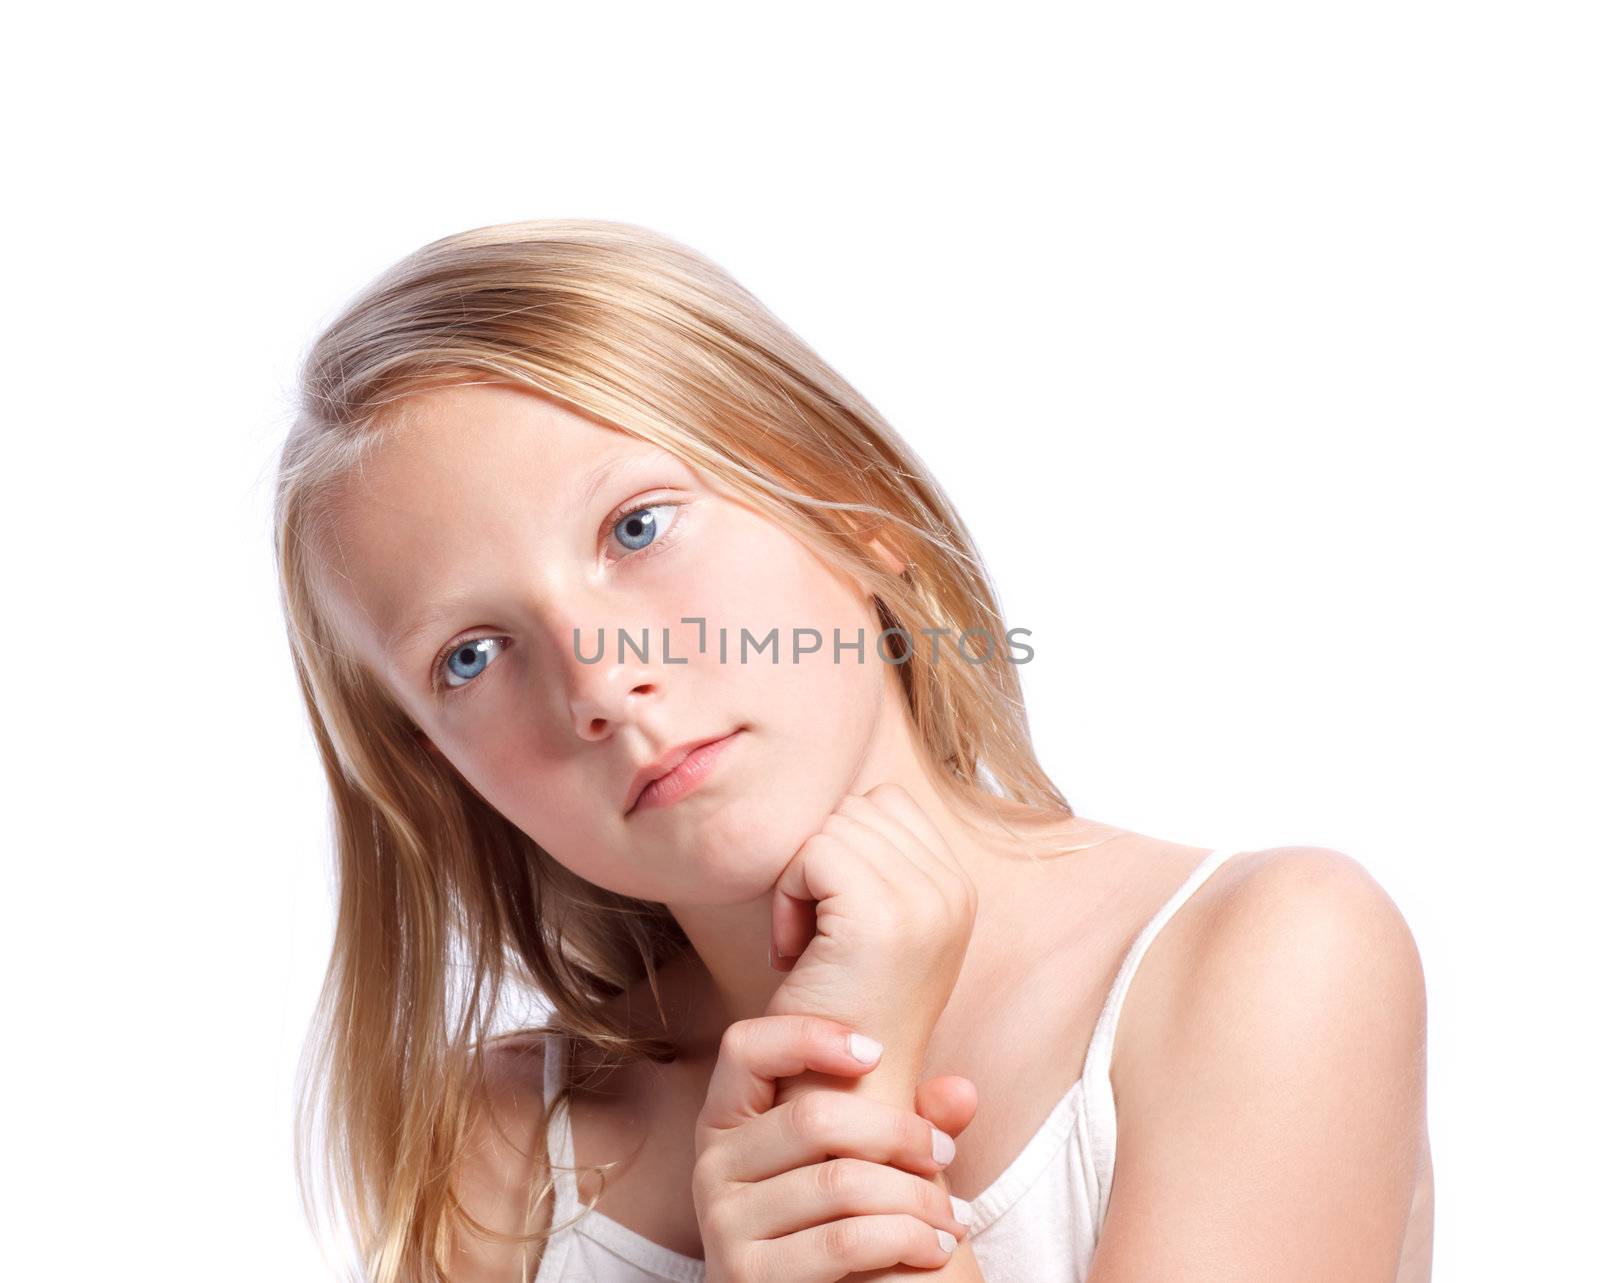 Young Blonde Girl Thinking or Looking - Isolated on White